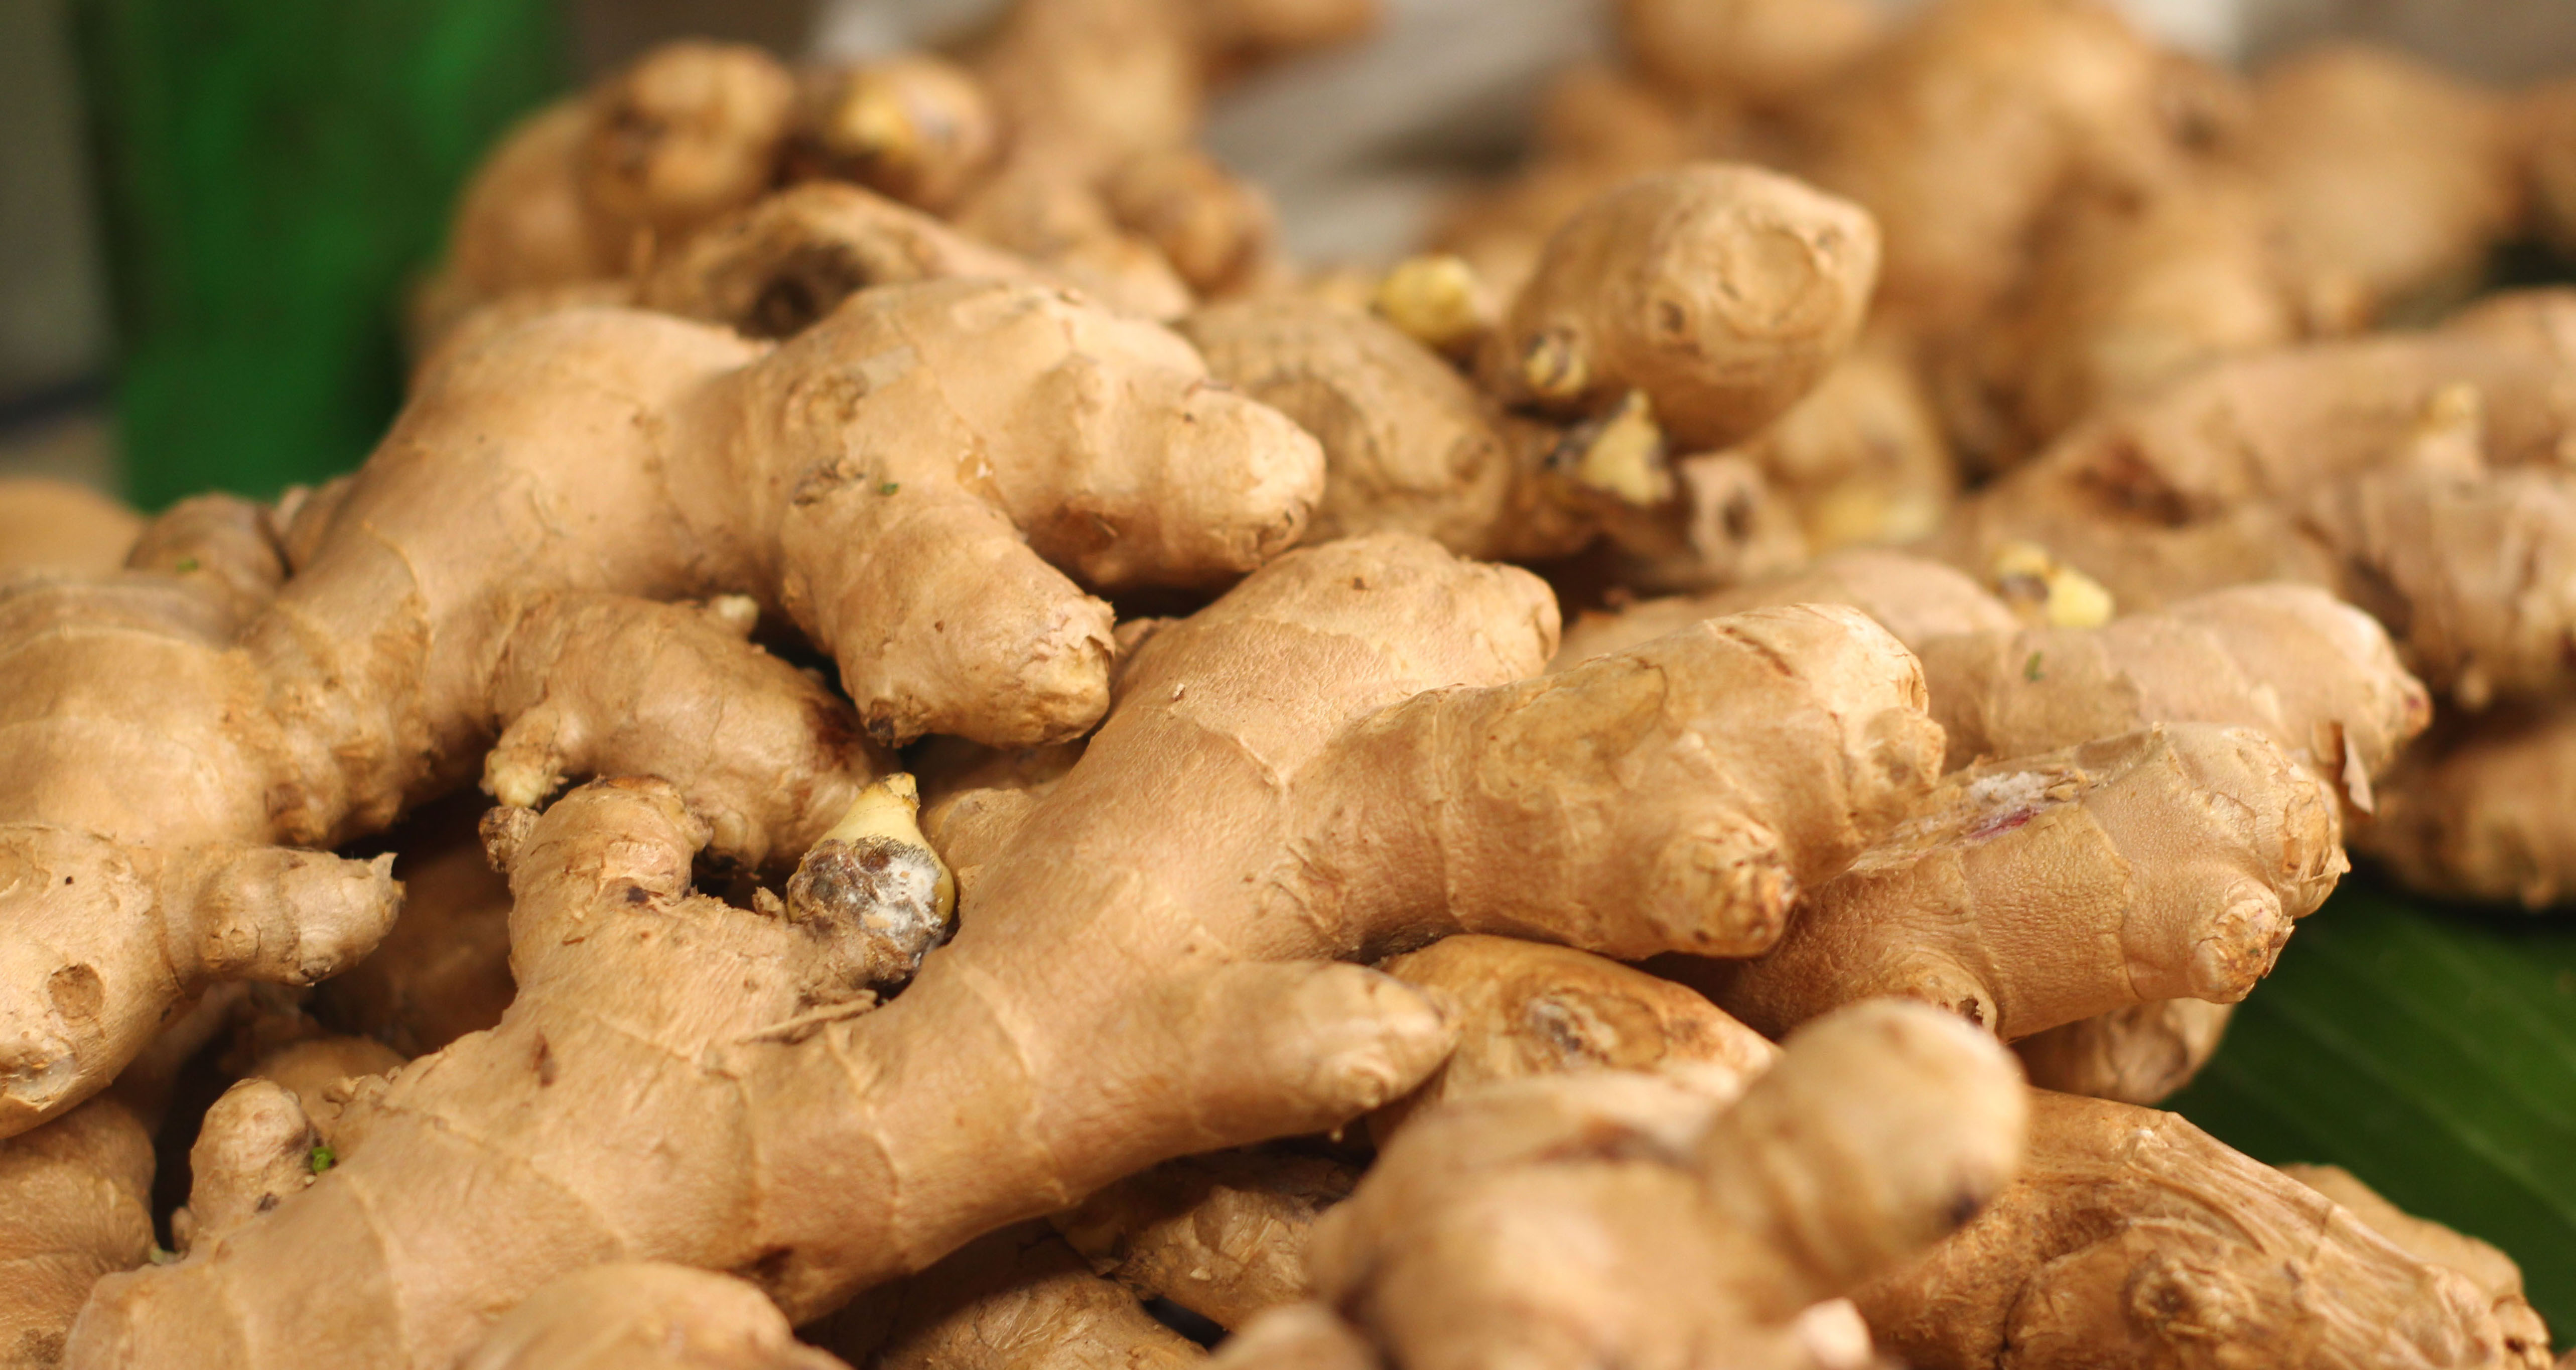 Ginger root at the market